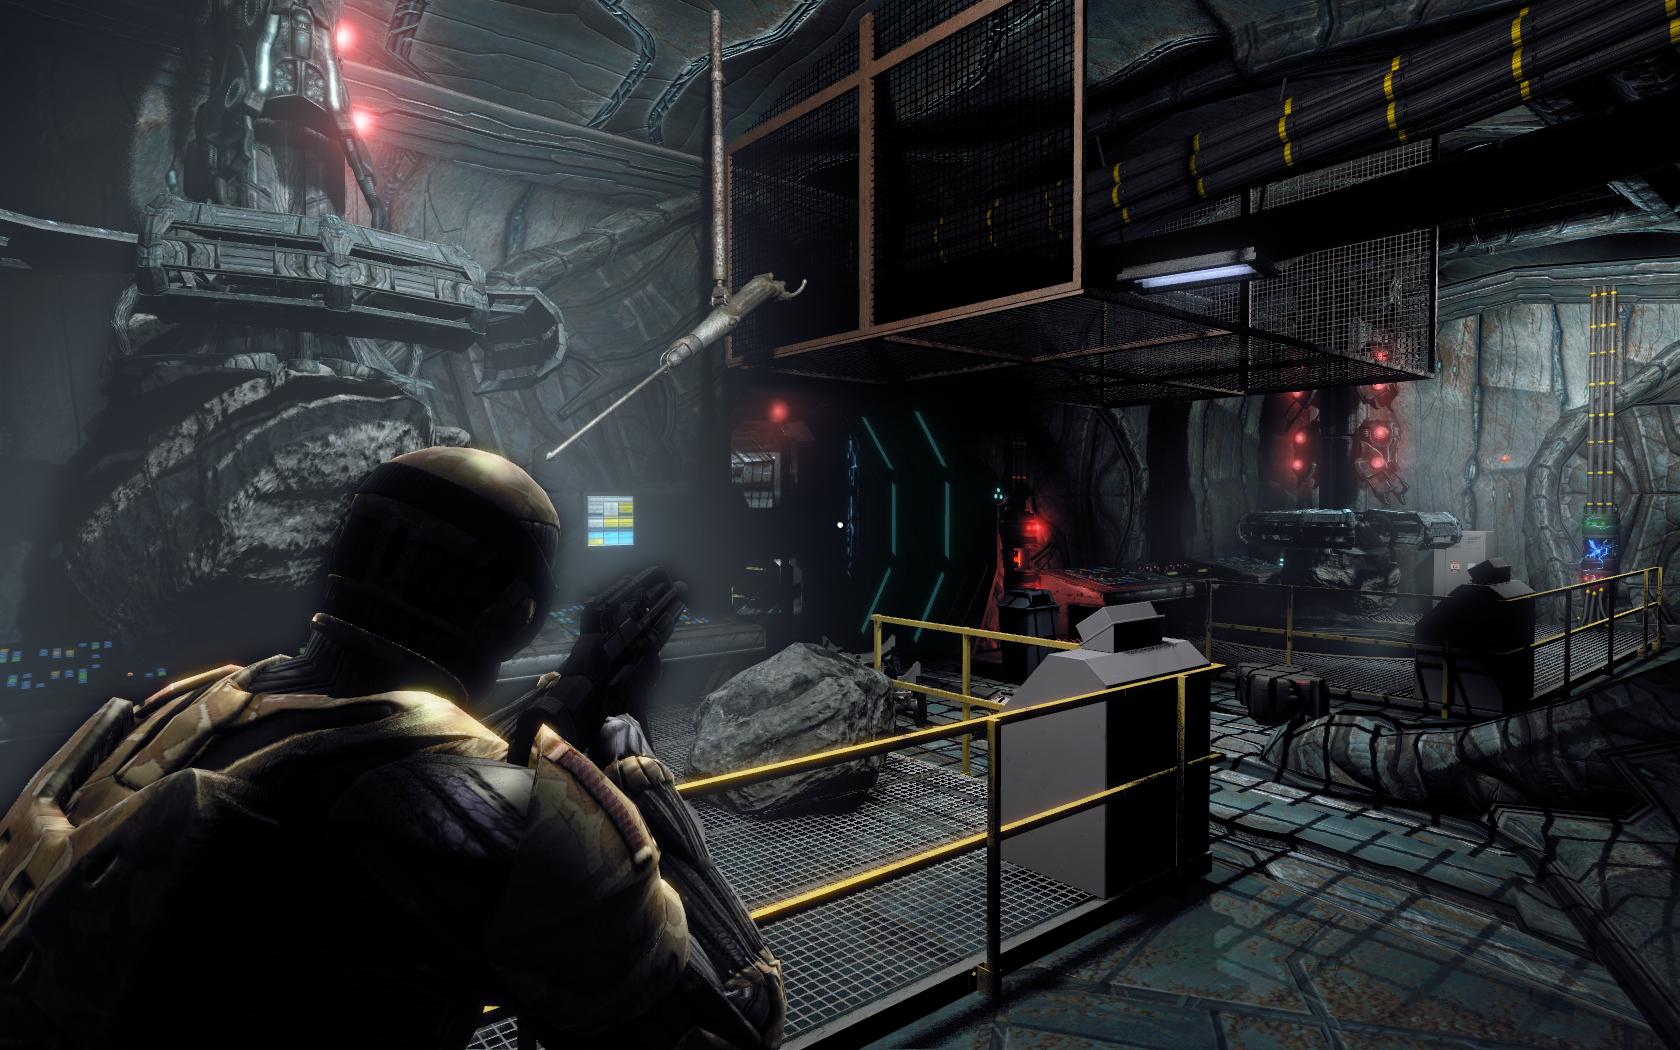 Dark Energy is a great looking sci-fi third person shooter with RPG elements mod for Crysis